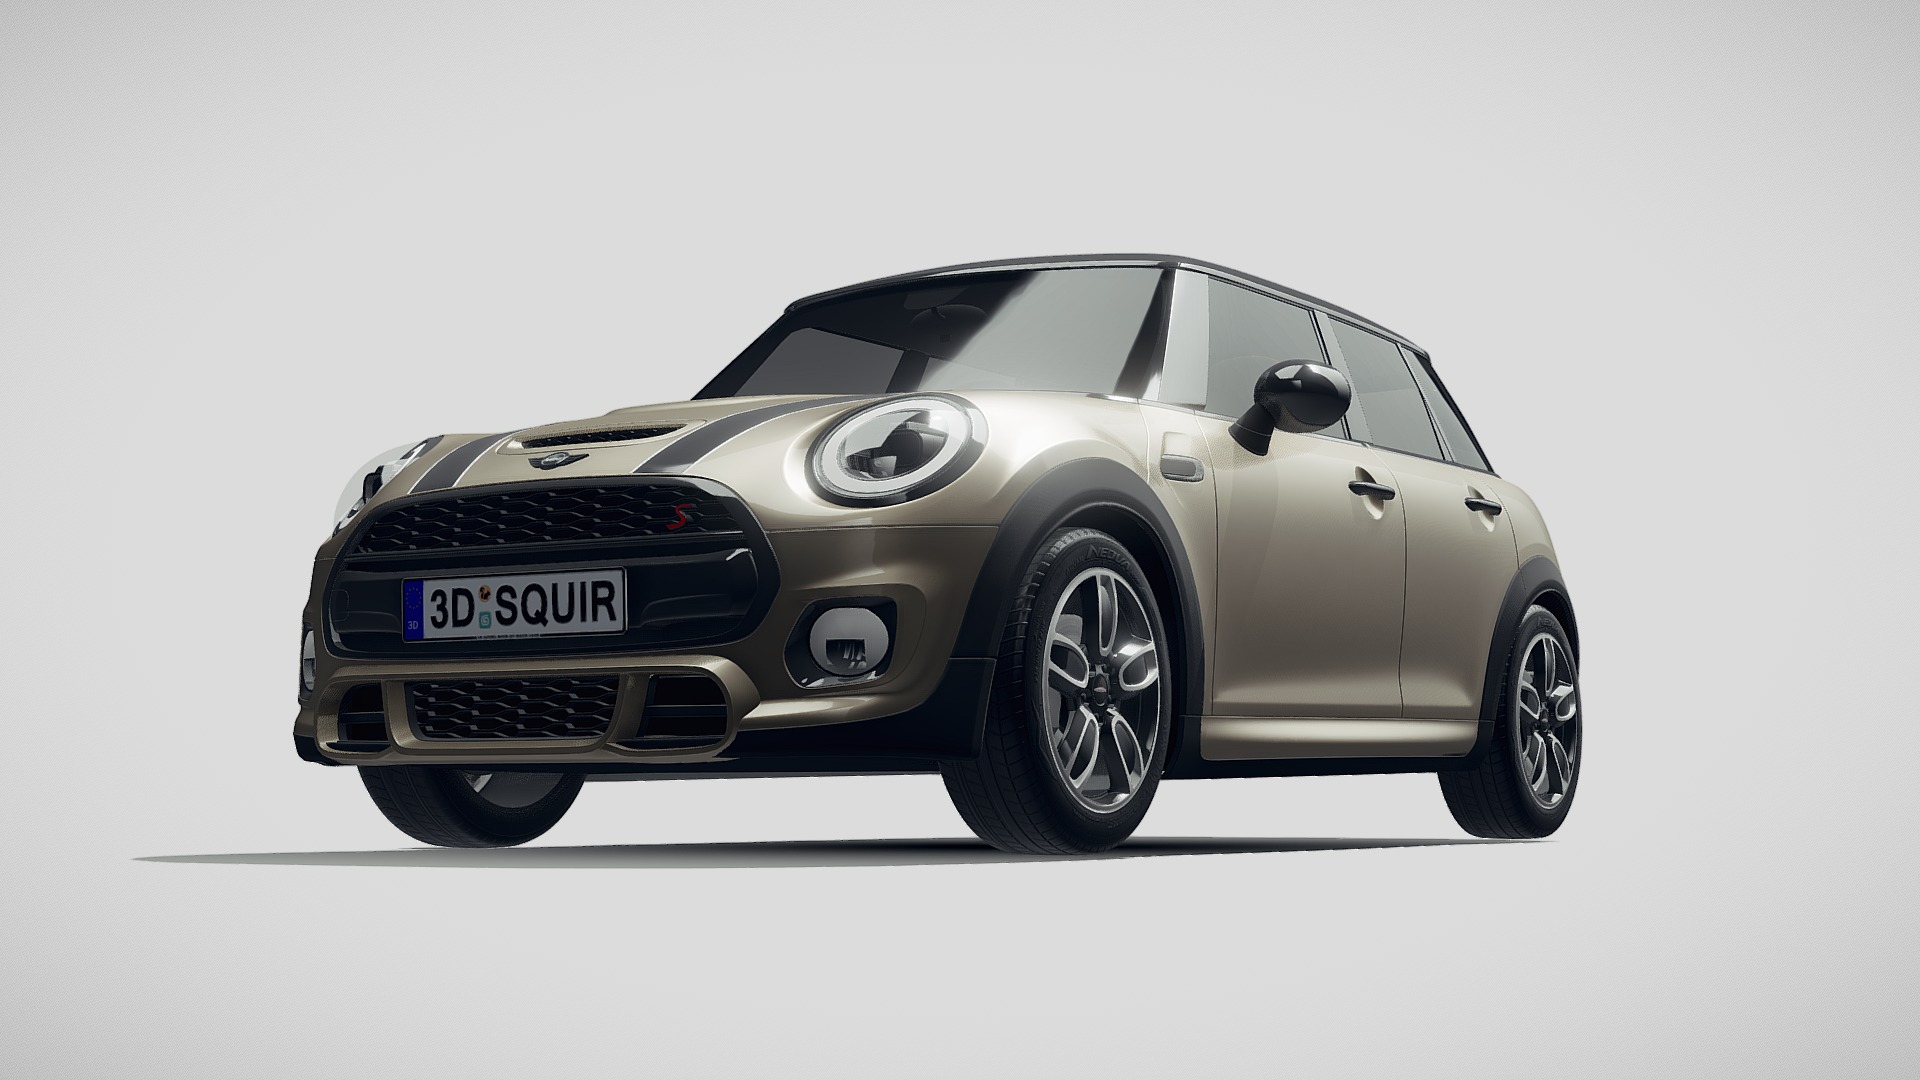 3D model Mini Cooper S 5-door 2019 - This is a 3D model of the Mini Cooper S 5-door 2019. The 3D model is about a silver car with a white background.